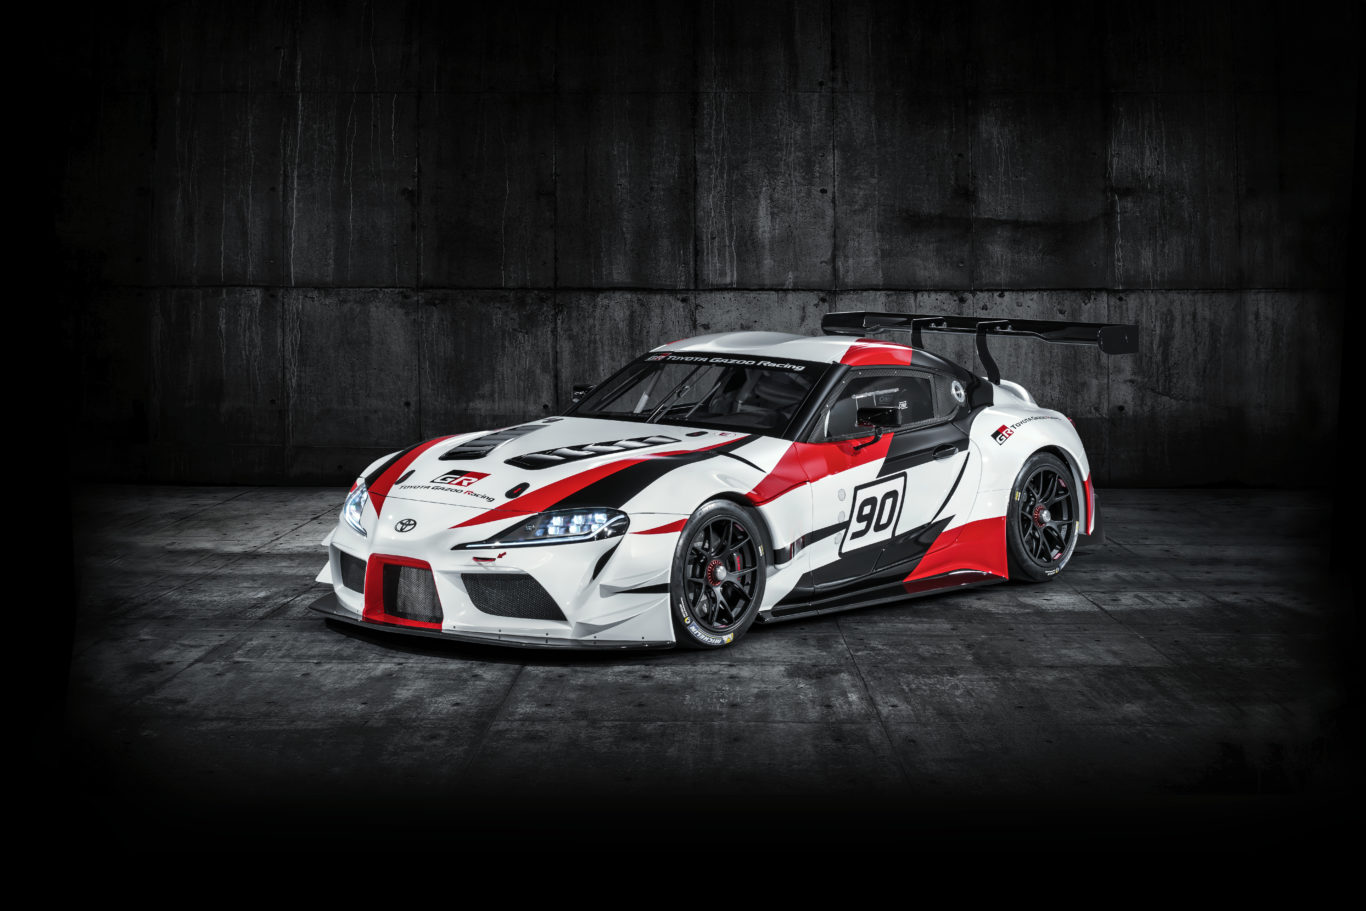 The new Toyota Supra shares many parts with the BMW Z4